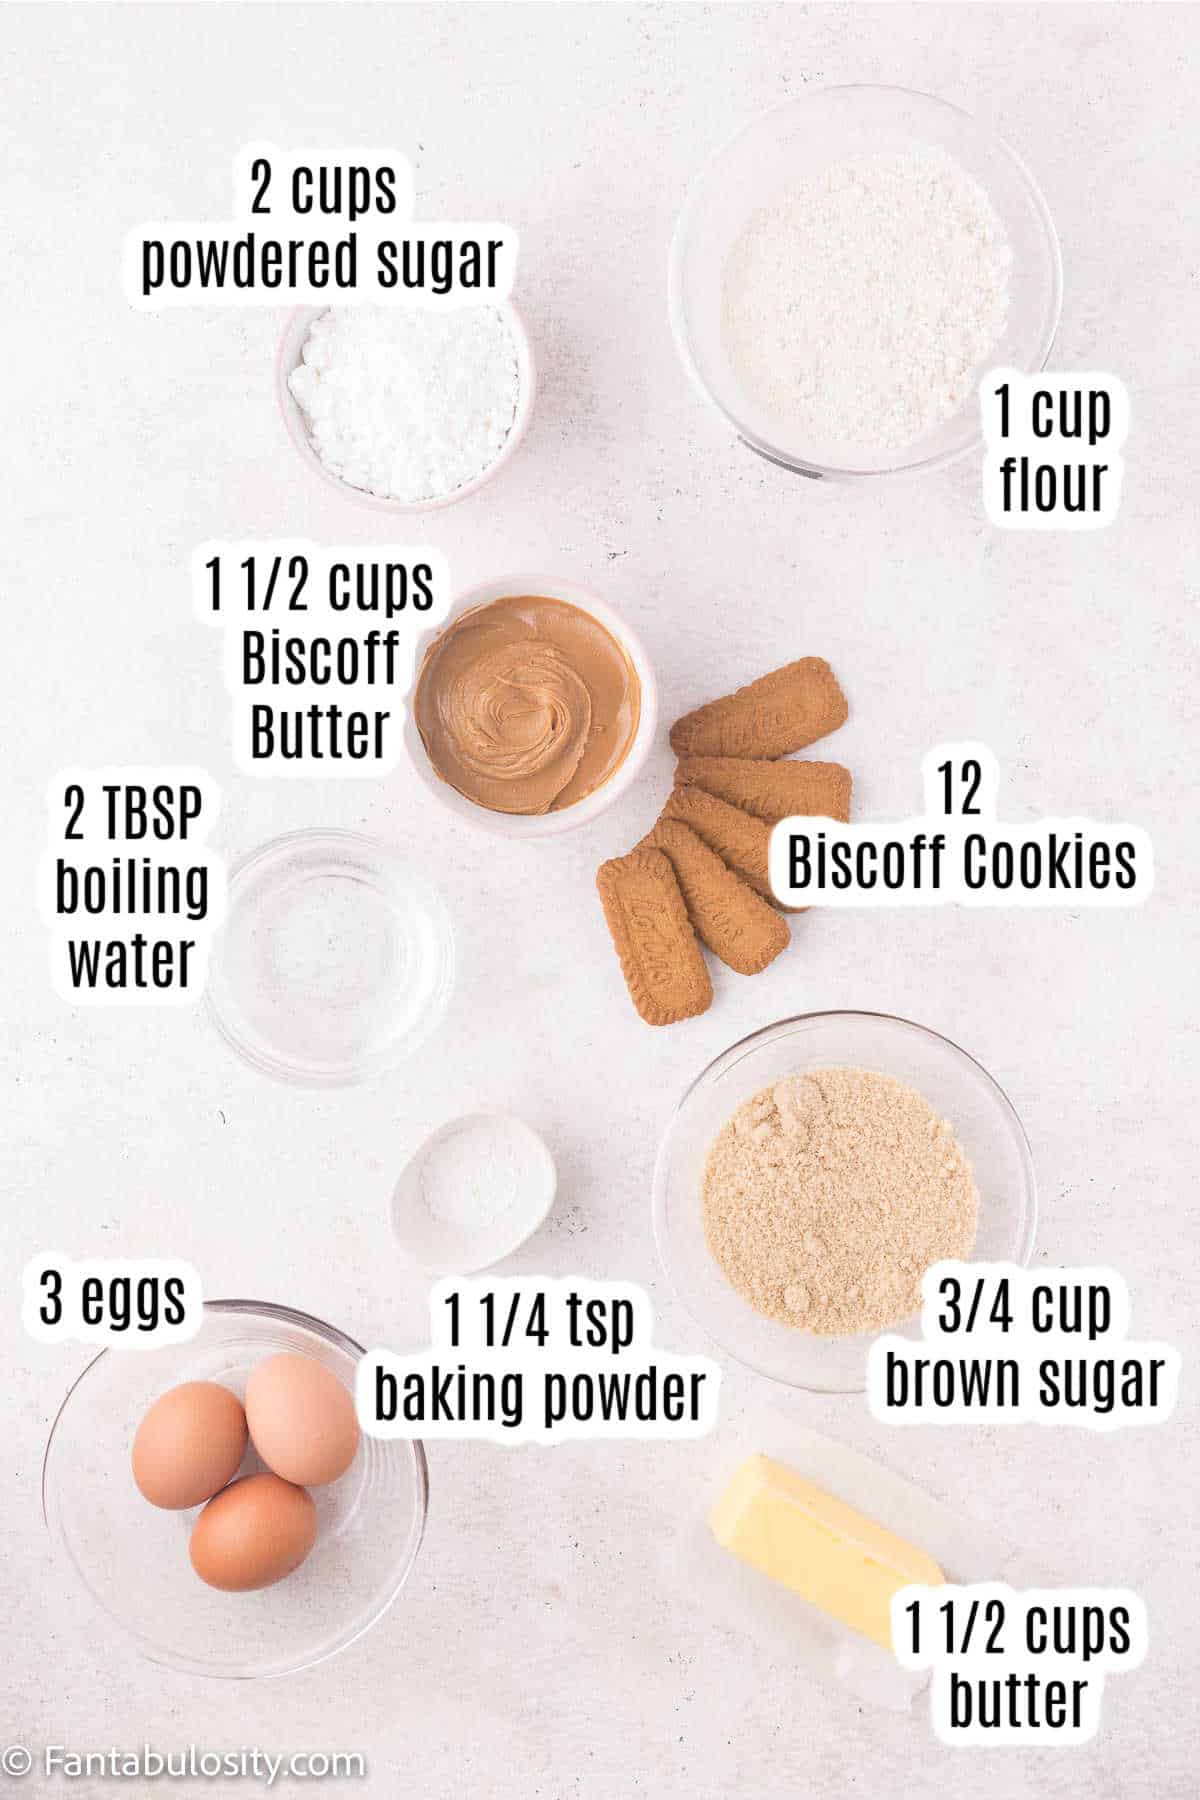 Labeled ingredients for Biscoff Cupcakes and Biscoff Buttercream